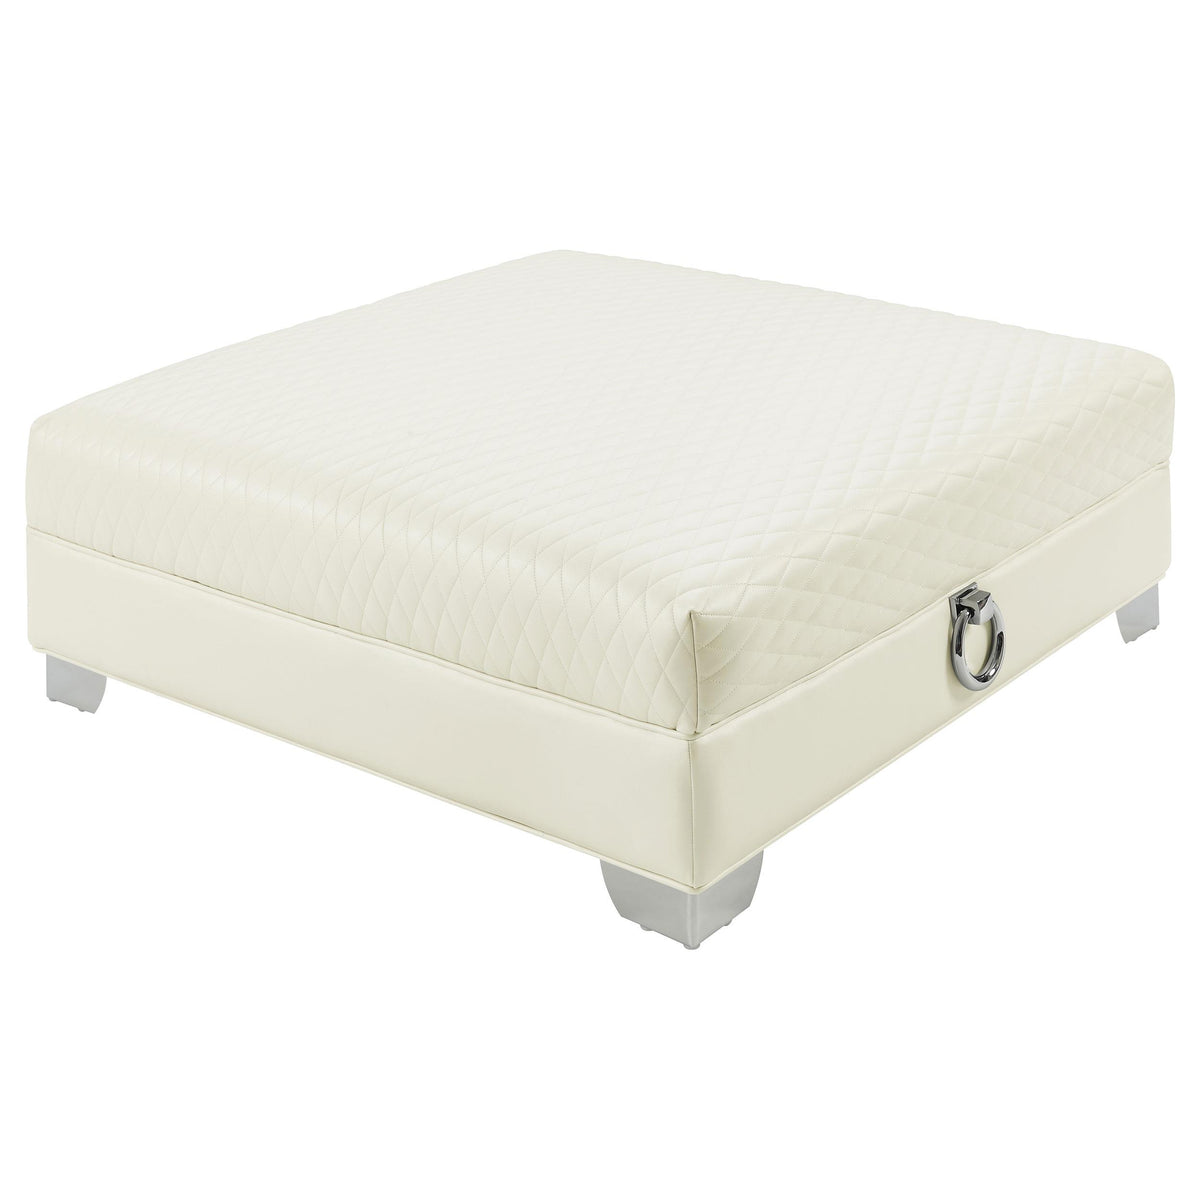 Chaviano Upholstered Ottoman Pearl White Chaviano Upholstered Ottoman Pearl White Half Price Furniture